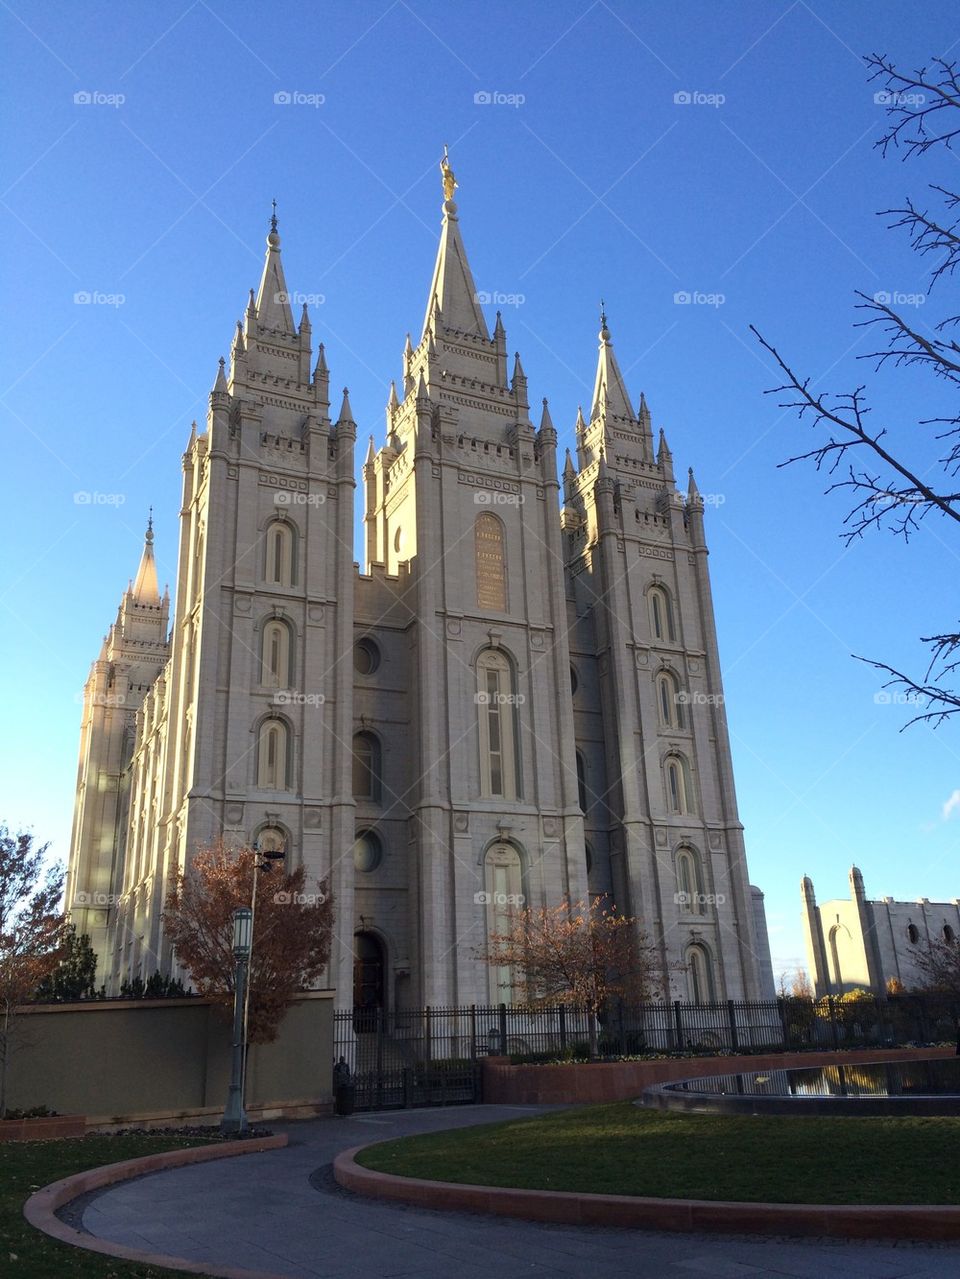 The Church of Latter Day Saints Temple